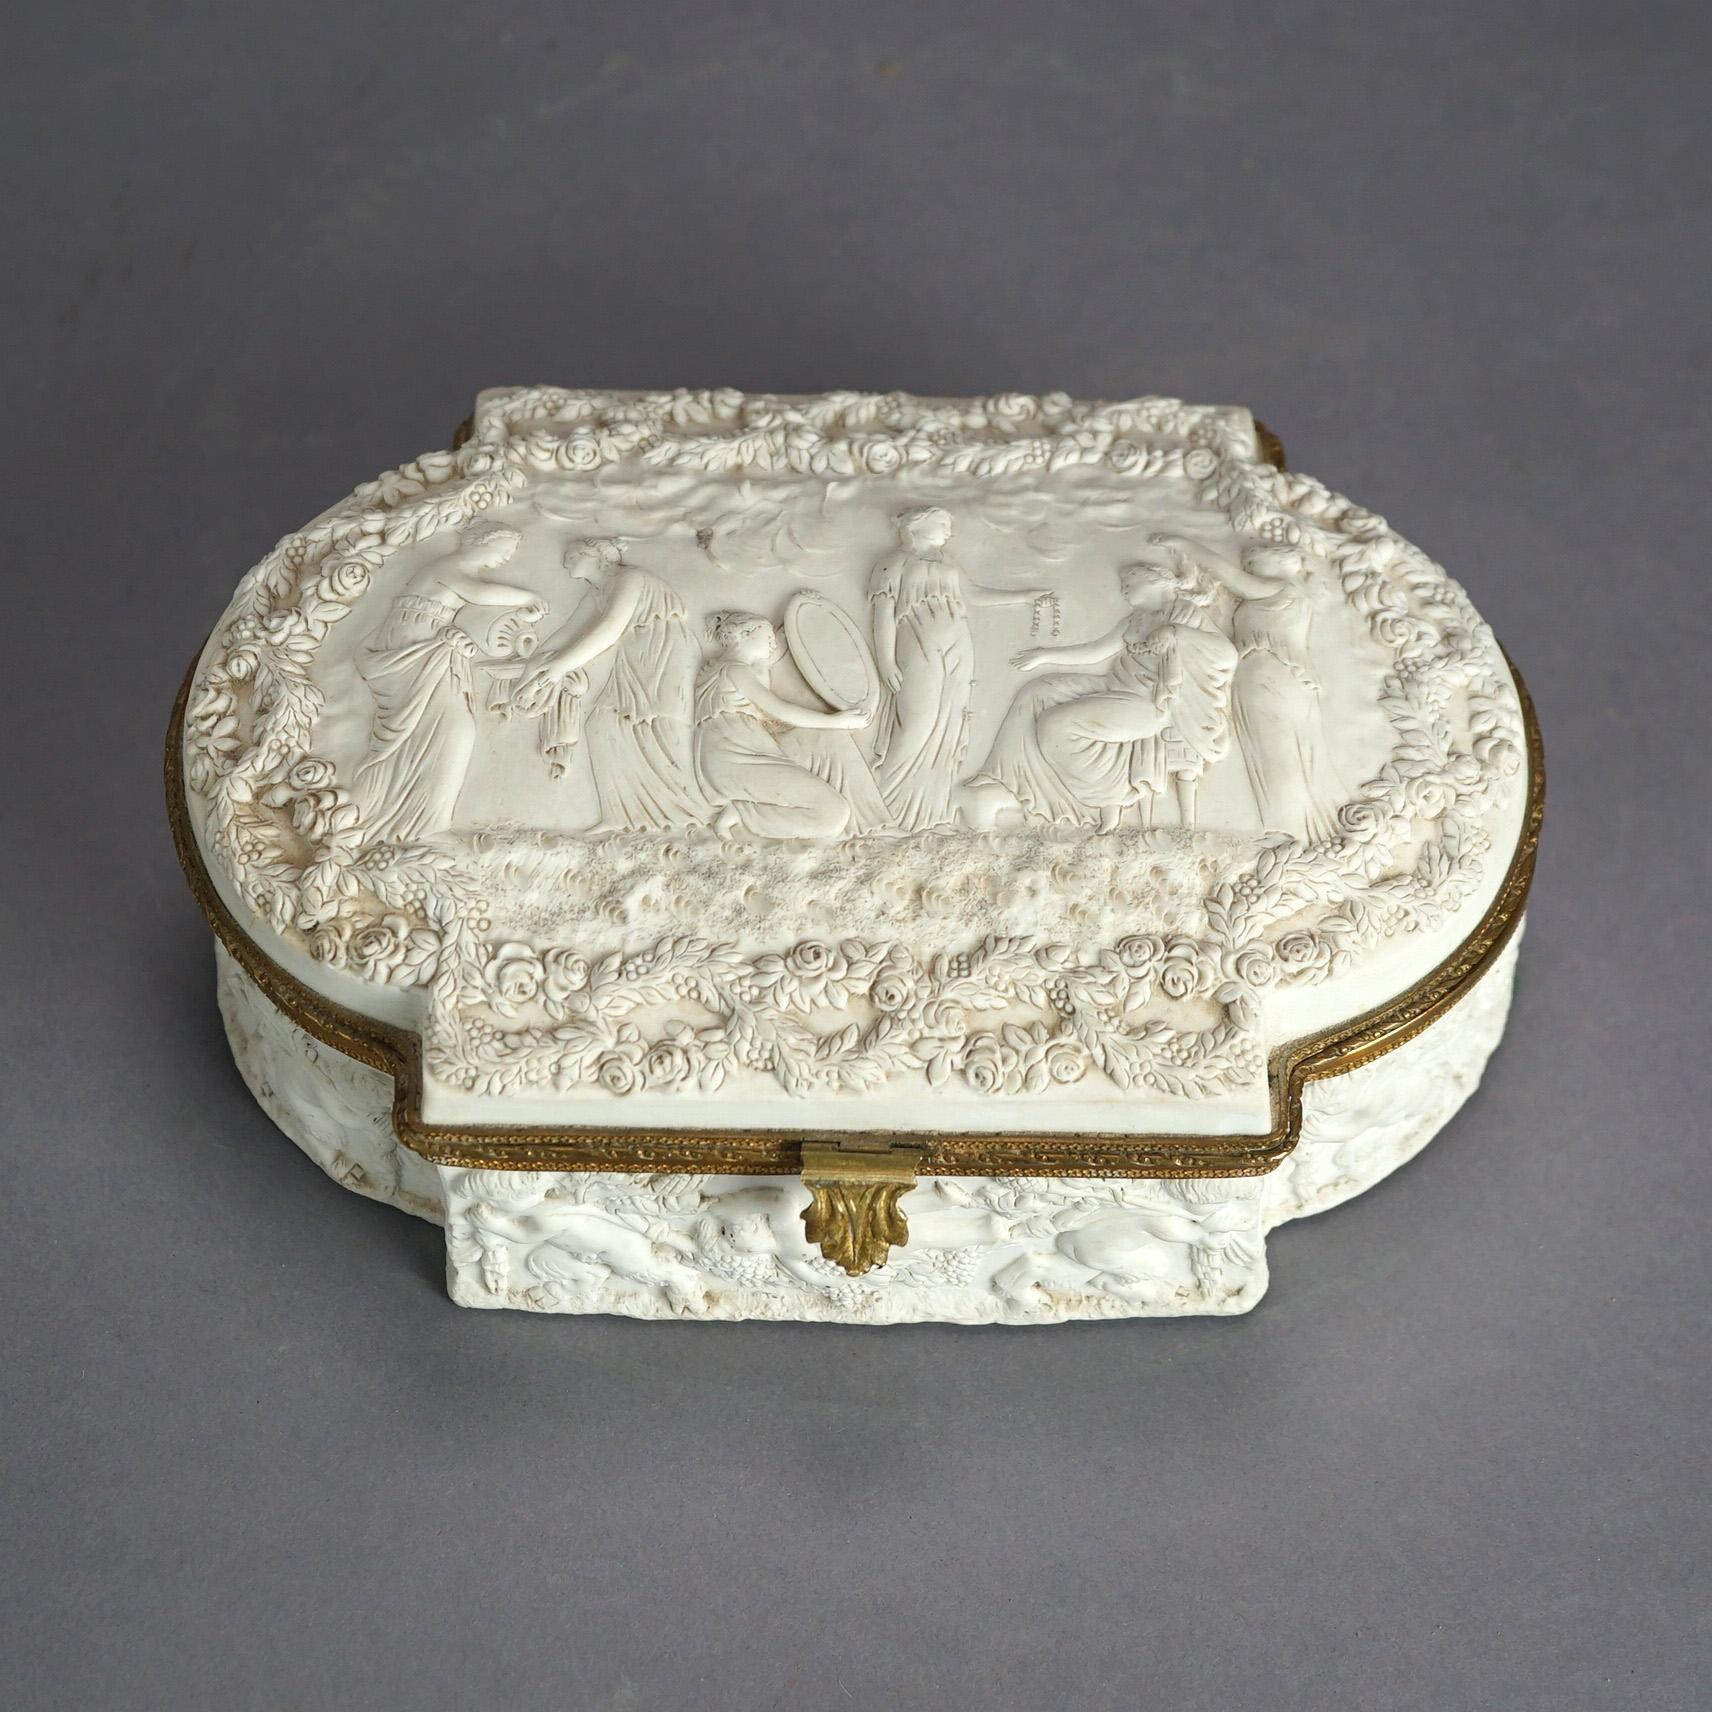 An antique French Sevres bridal dresser box offers parian porcelain construction with high relief Classical Roman-Greco scene of maidens preparing the bride for marriage and dancing cherubs with wine grapes, hinged and velvet lined, 19th